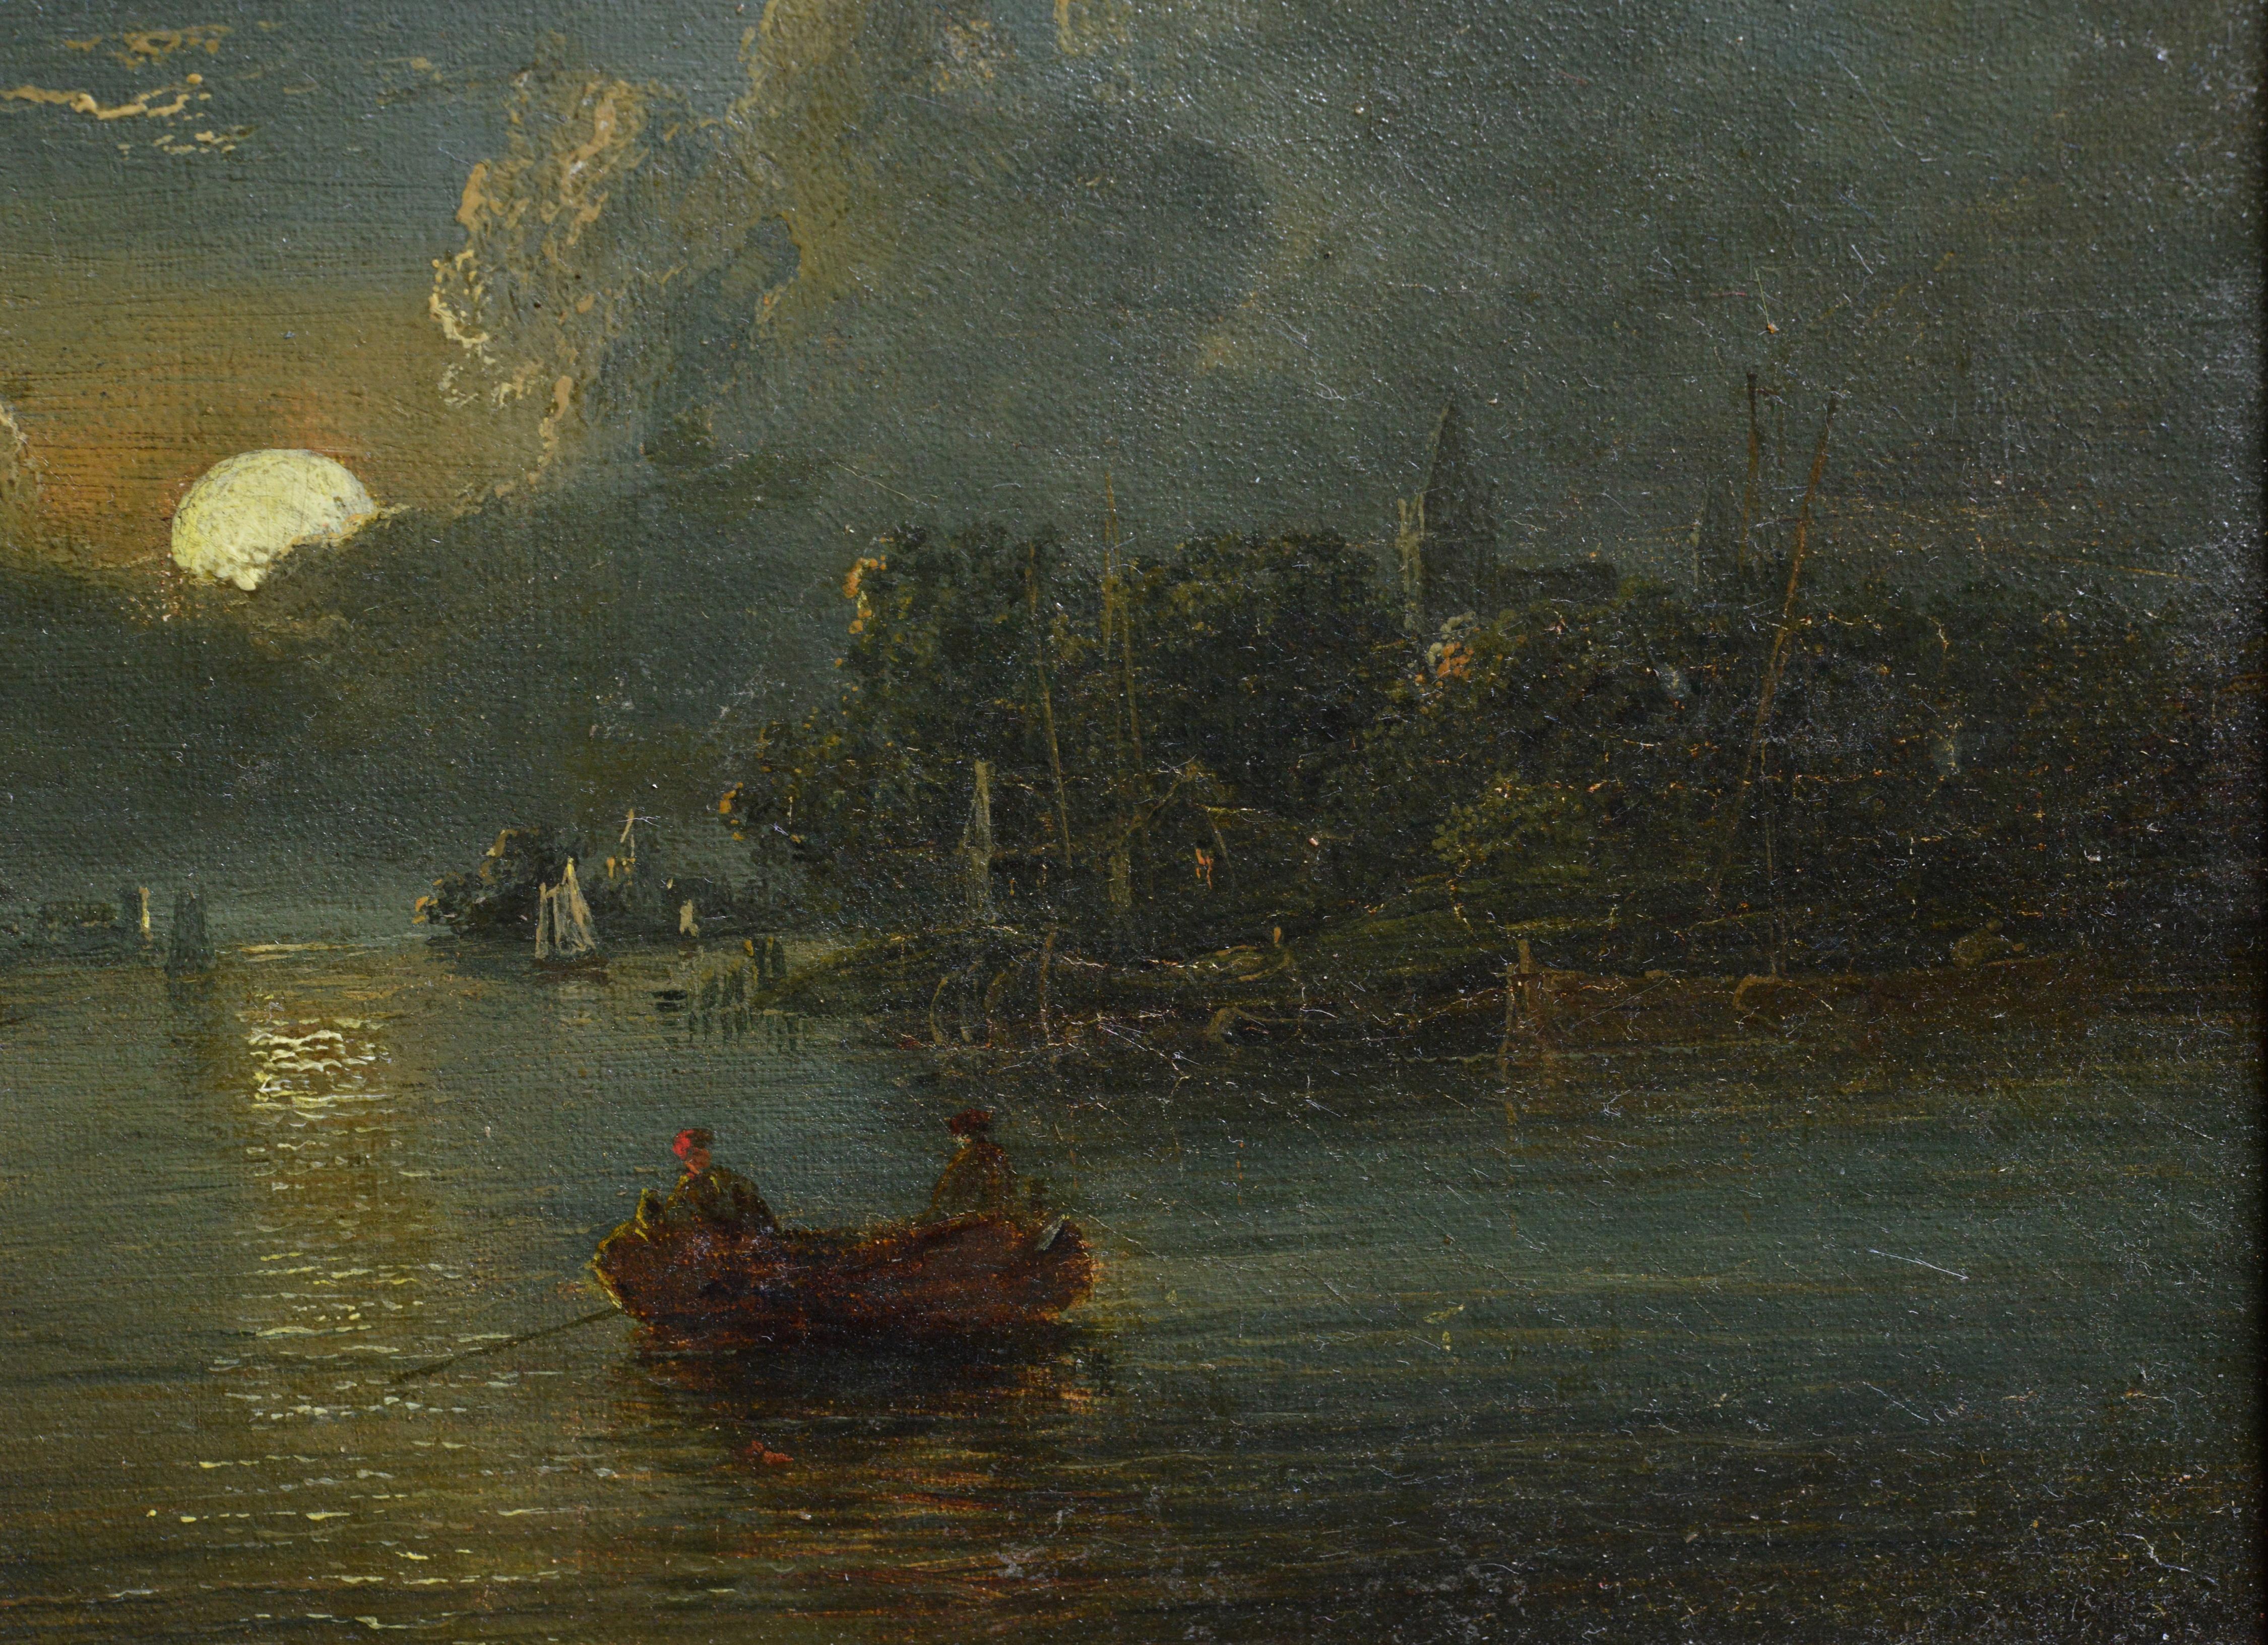 The painting is indistinctly signed lower left in red and was said to be of Young Crome type moonlit landscapes.  Busy water surface traffic in nocturnal scenery. Antique oil painting on canvas, signed, framed.
Size app.: 25.2 x 30.3 cm (roughly 9.9